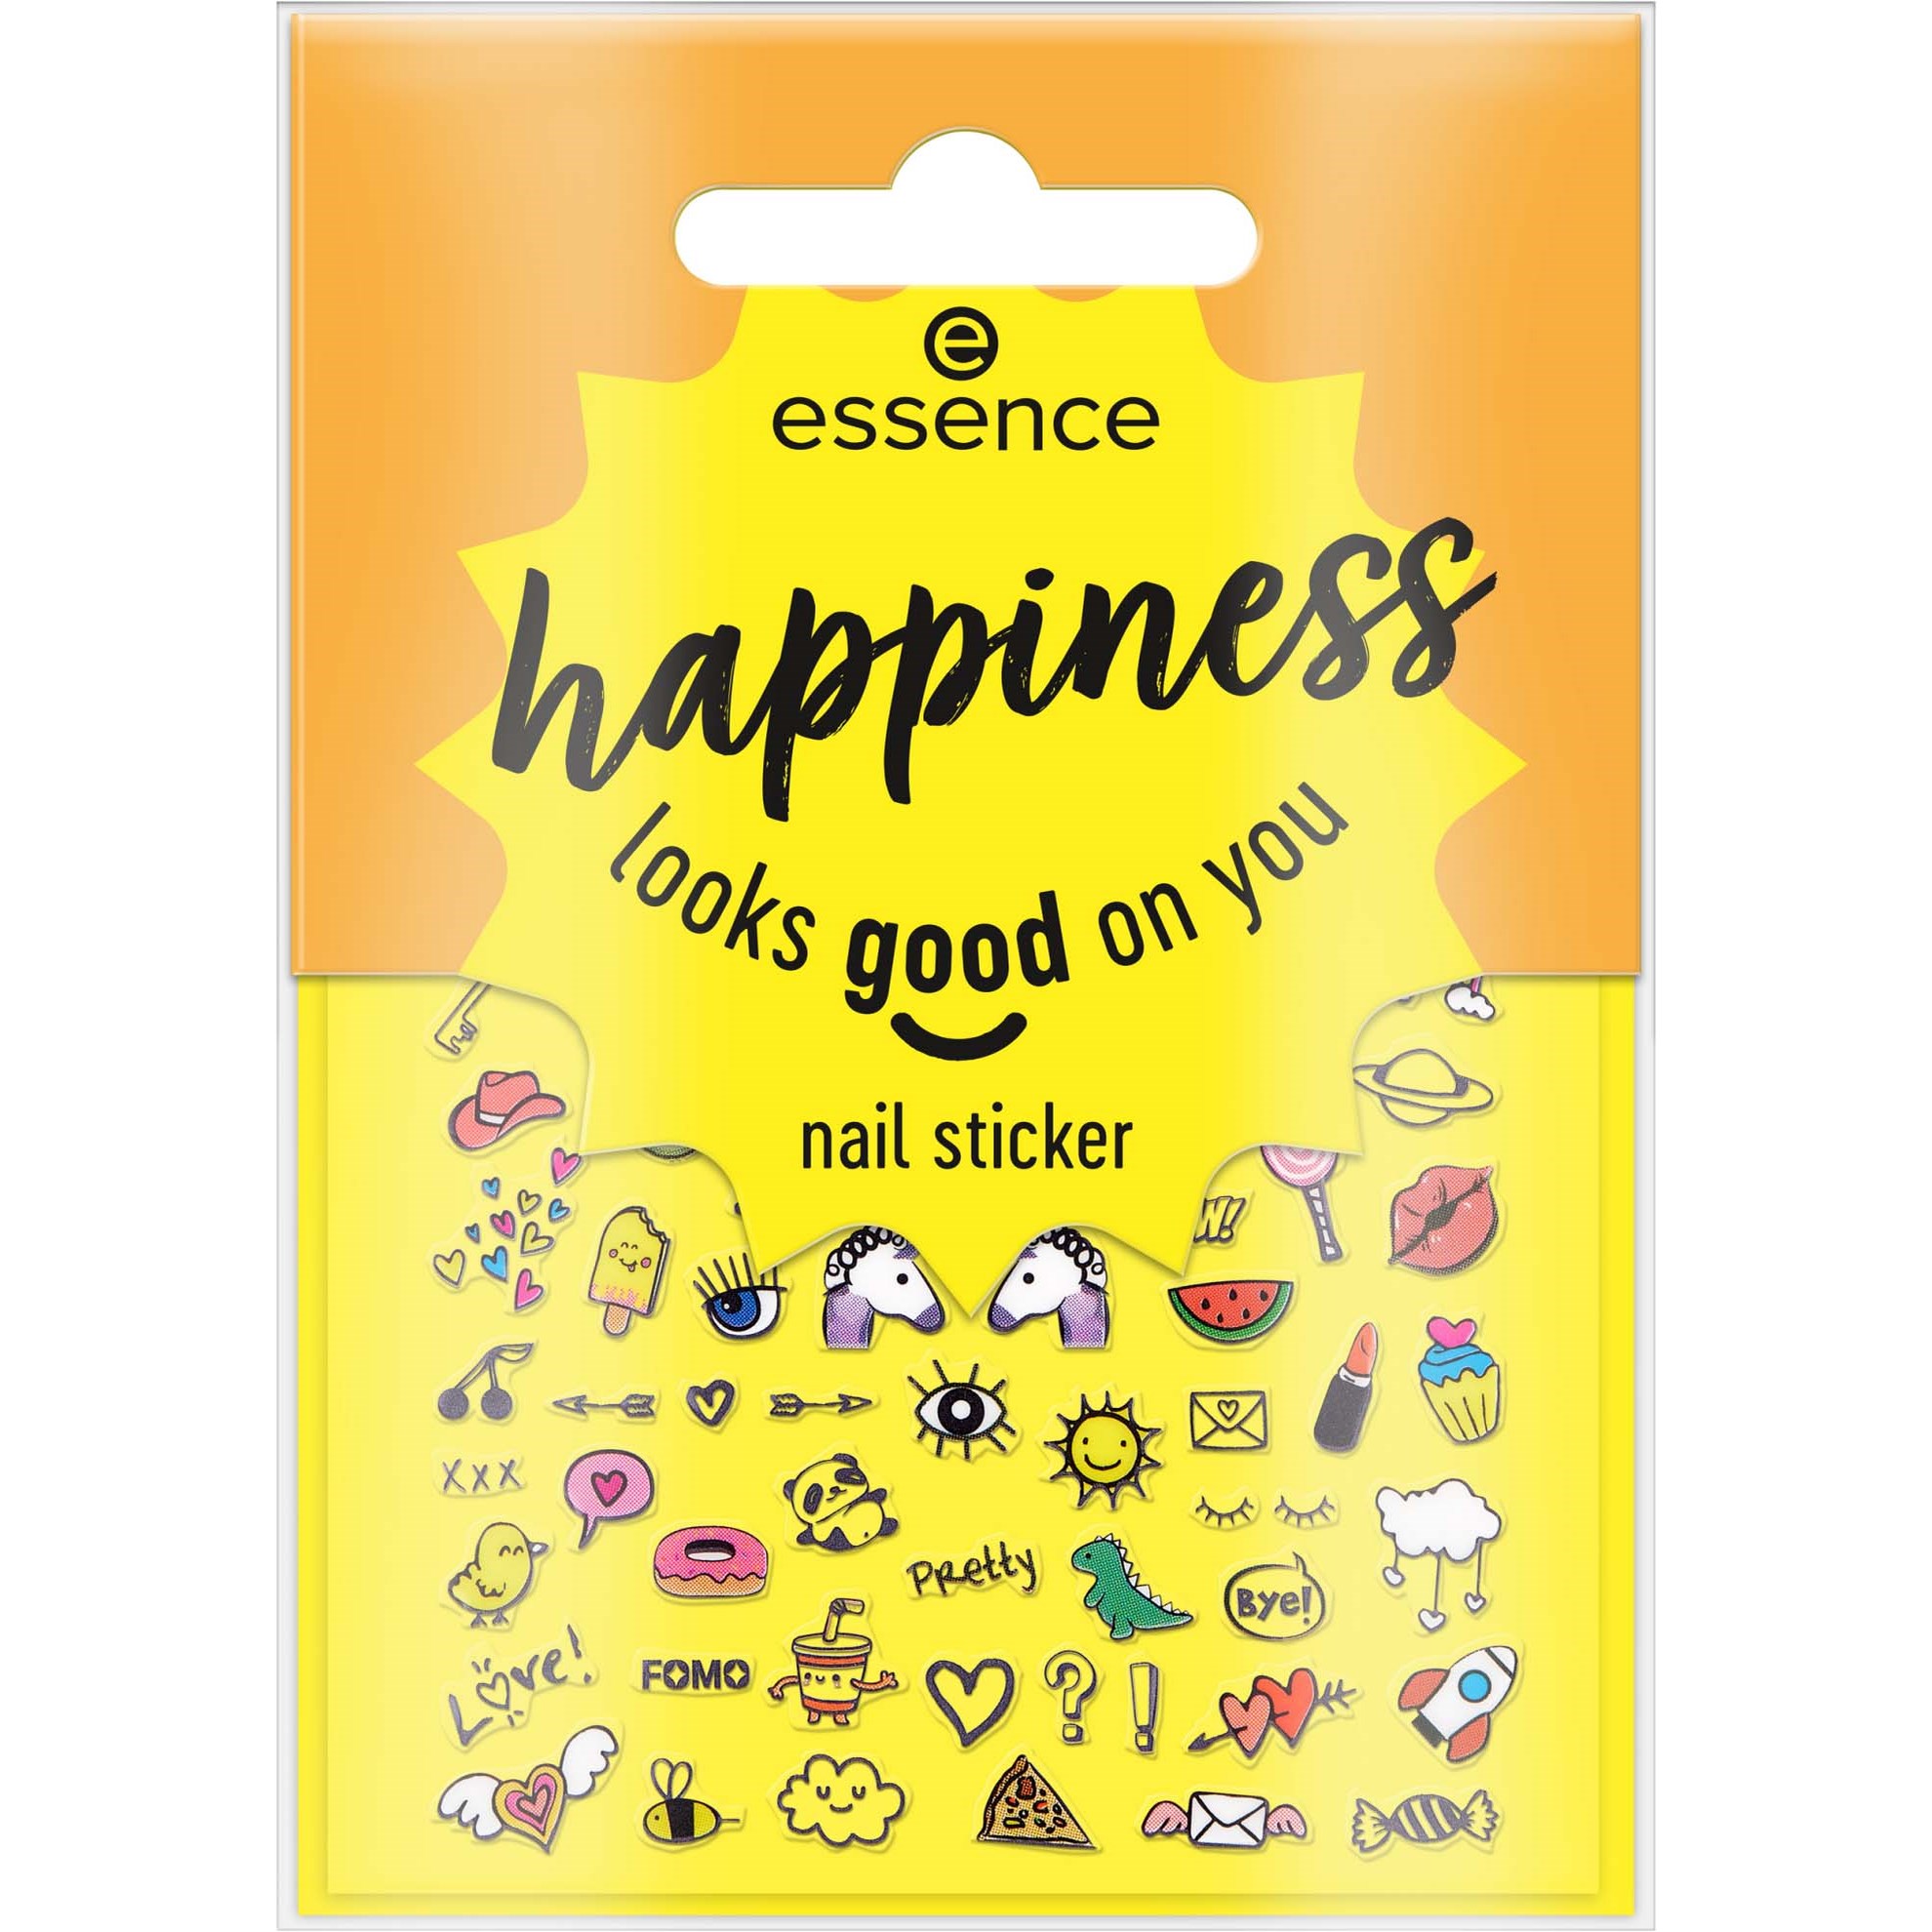 essence Happiness Looks Good On You Nail Sticker